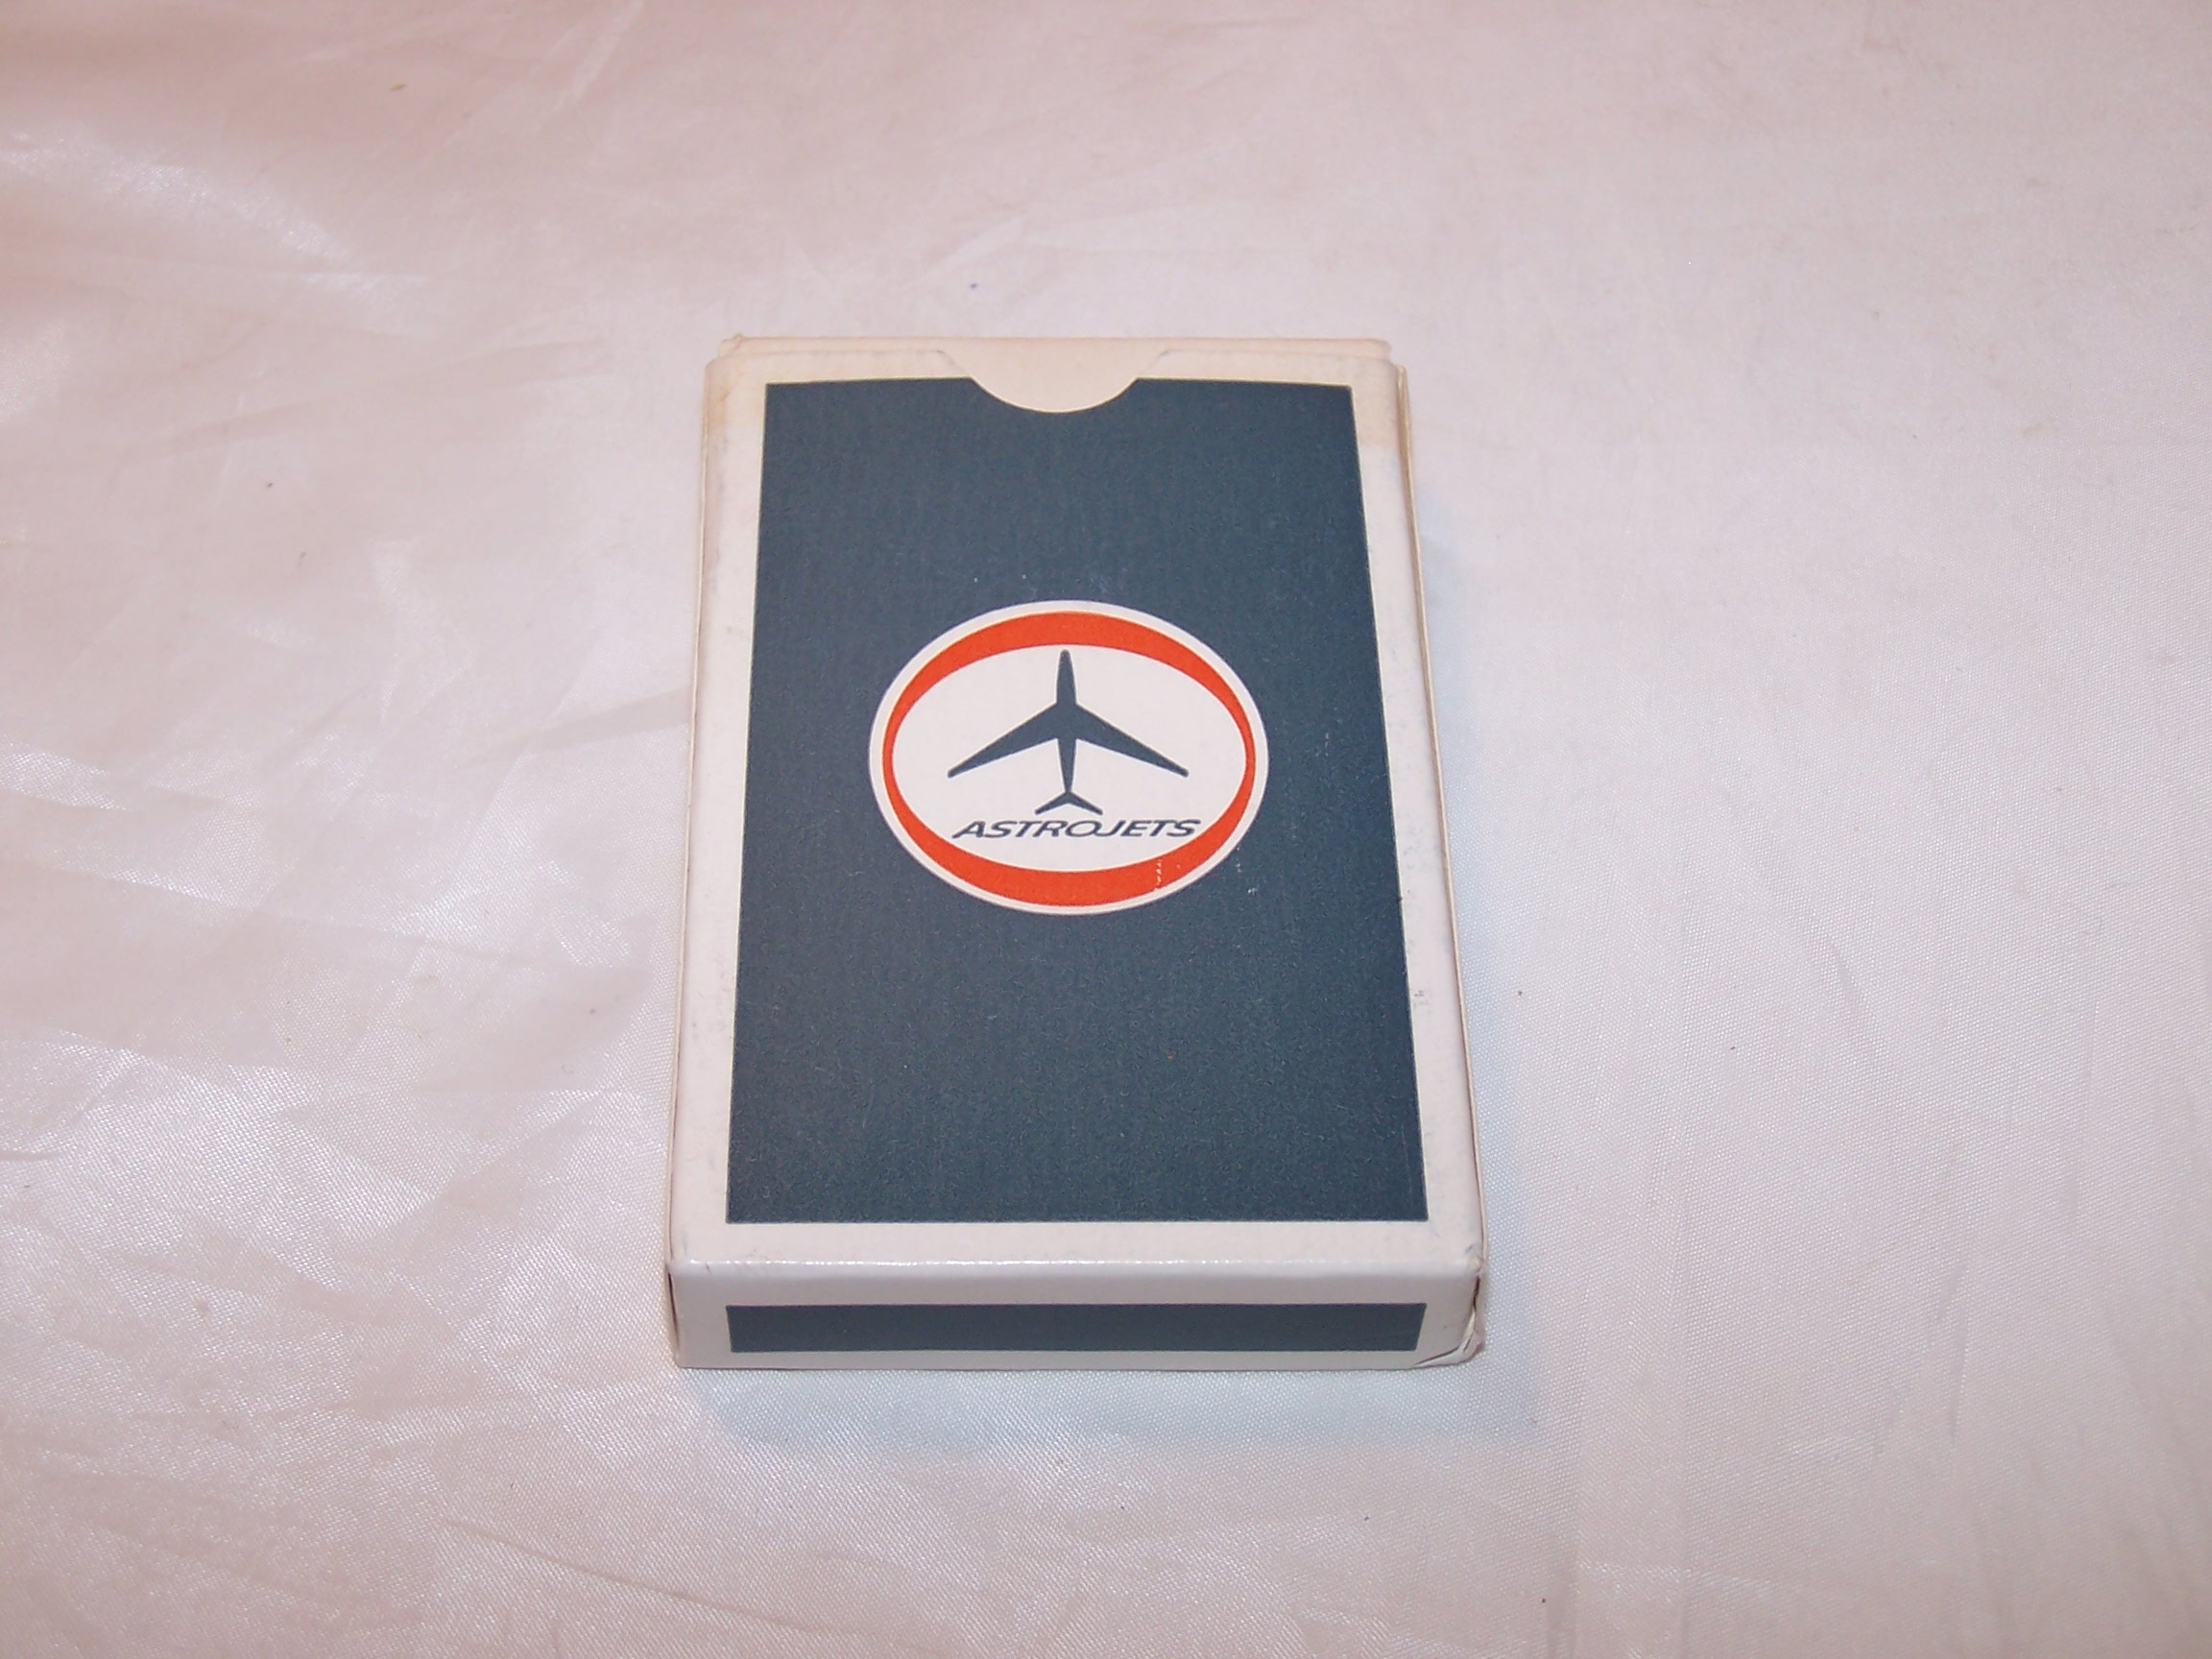 Image 1 of Playing Cards, American Airlines Astrojets, Orig Pkg